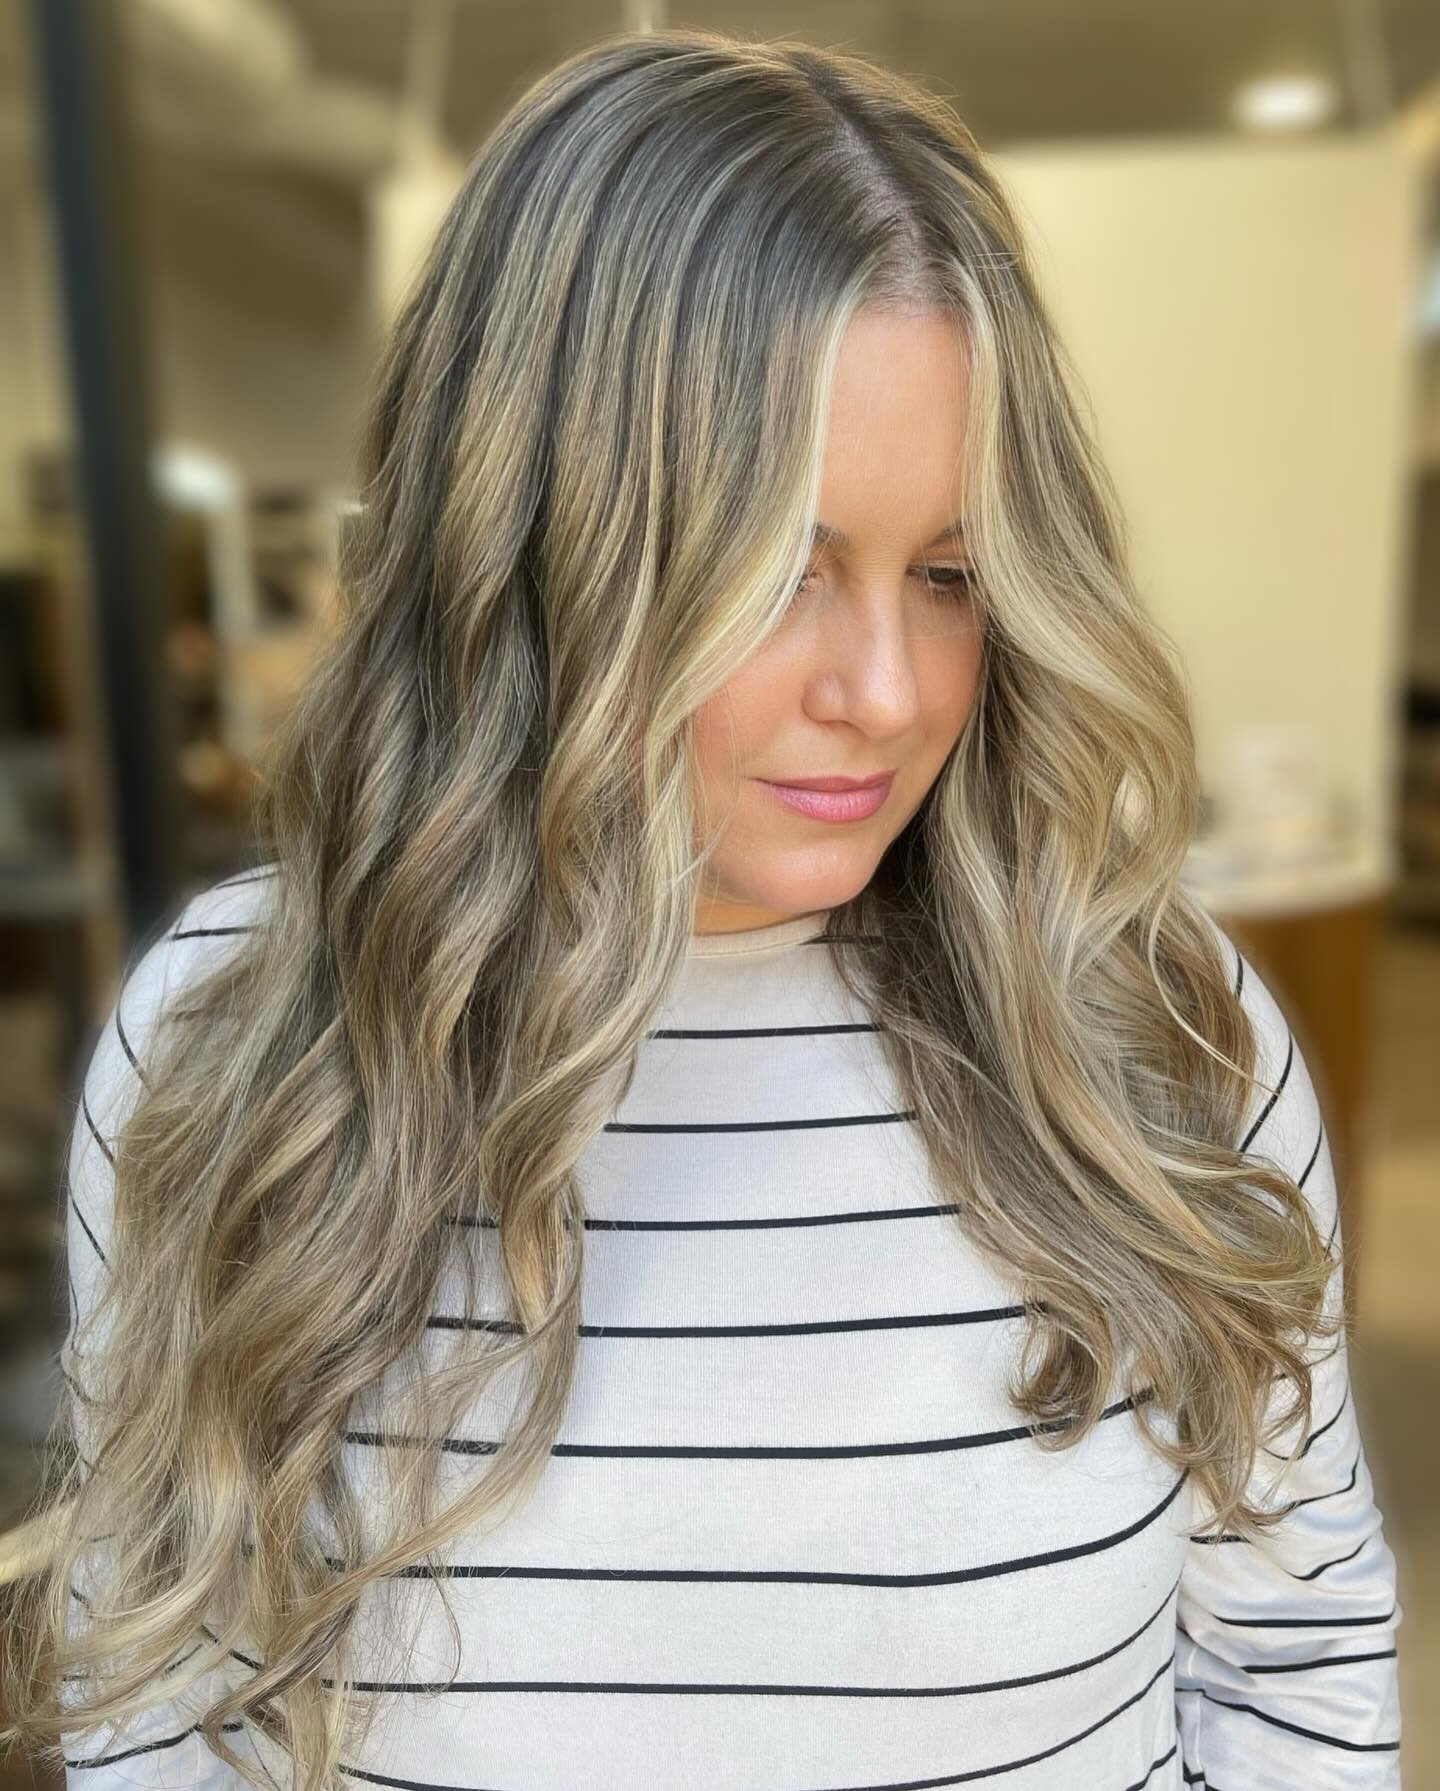 Money Honey! ⁠
⁠
@bleachellaa_ added brightness around the face with a perfect money piece. Swipe to check out the before + after!⁠
⁠
Visit mane-tained.com to book an appointment!⁠
⁠
#maneattraction